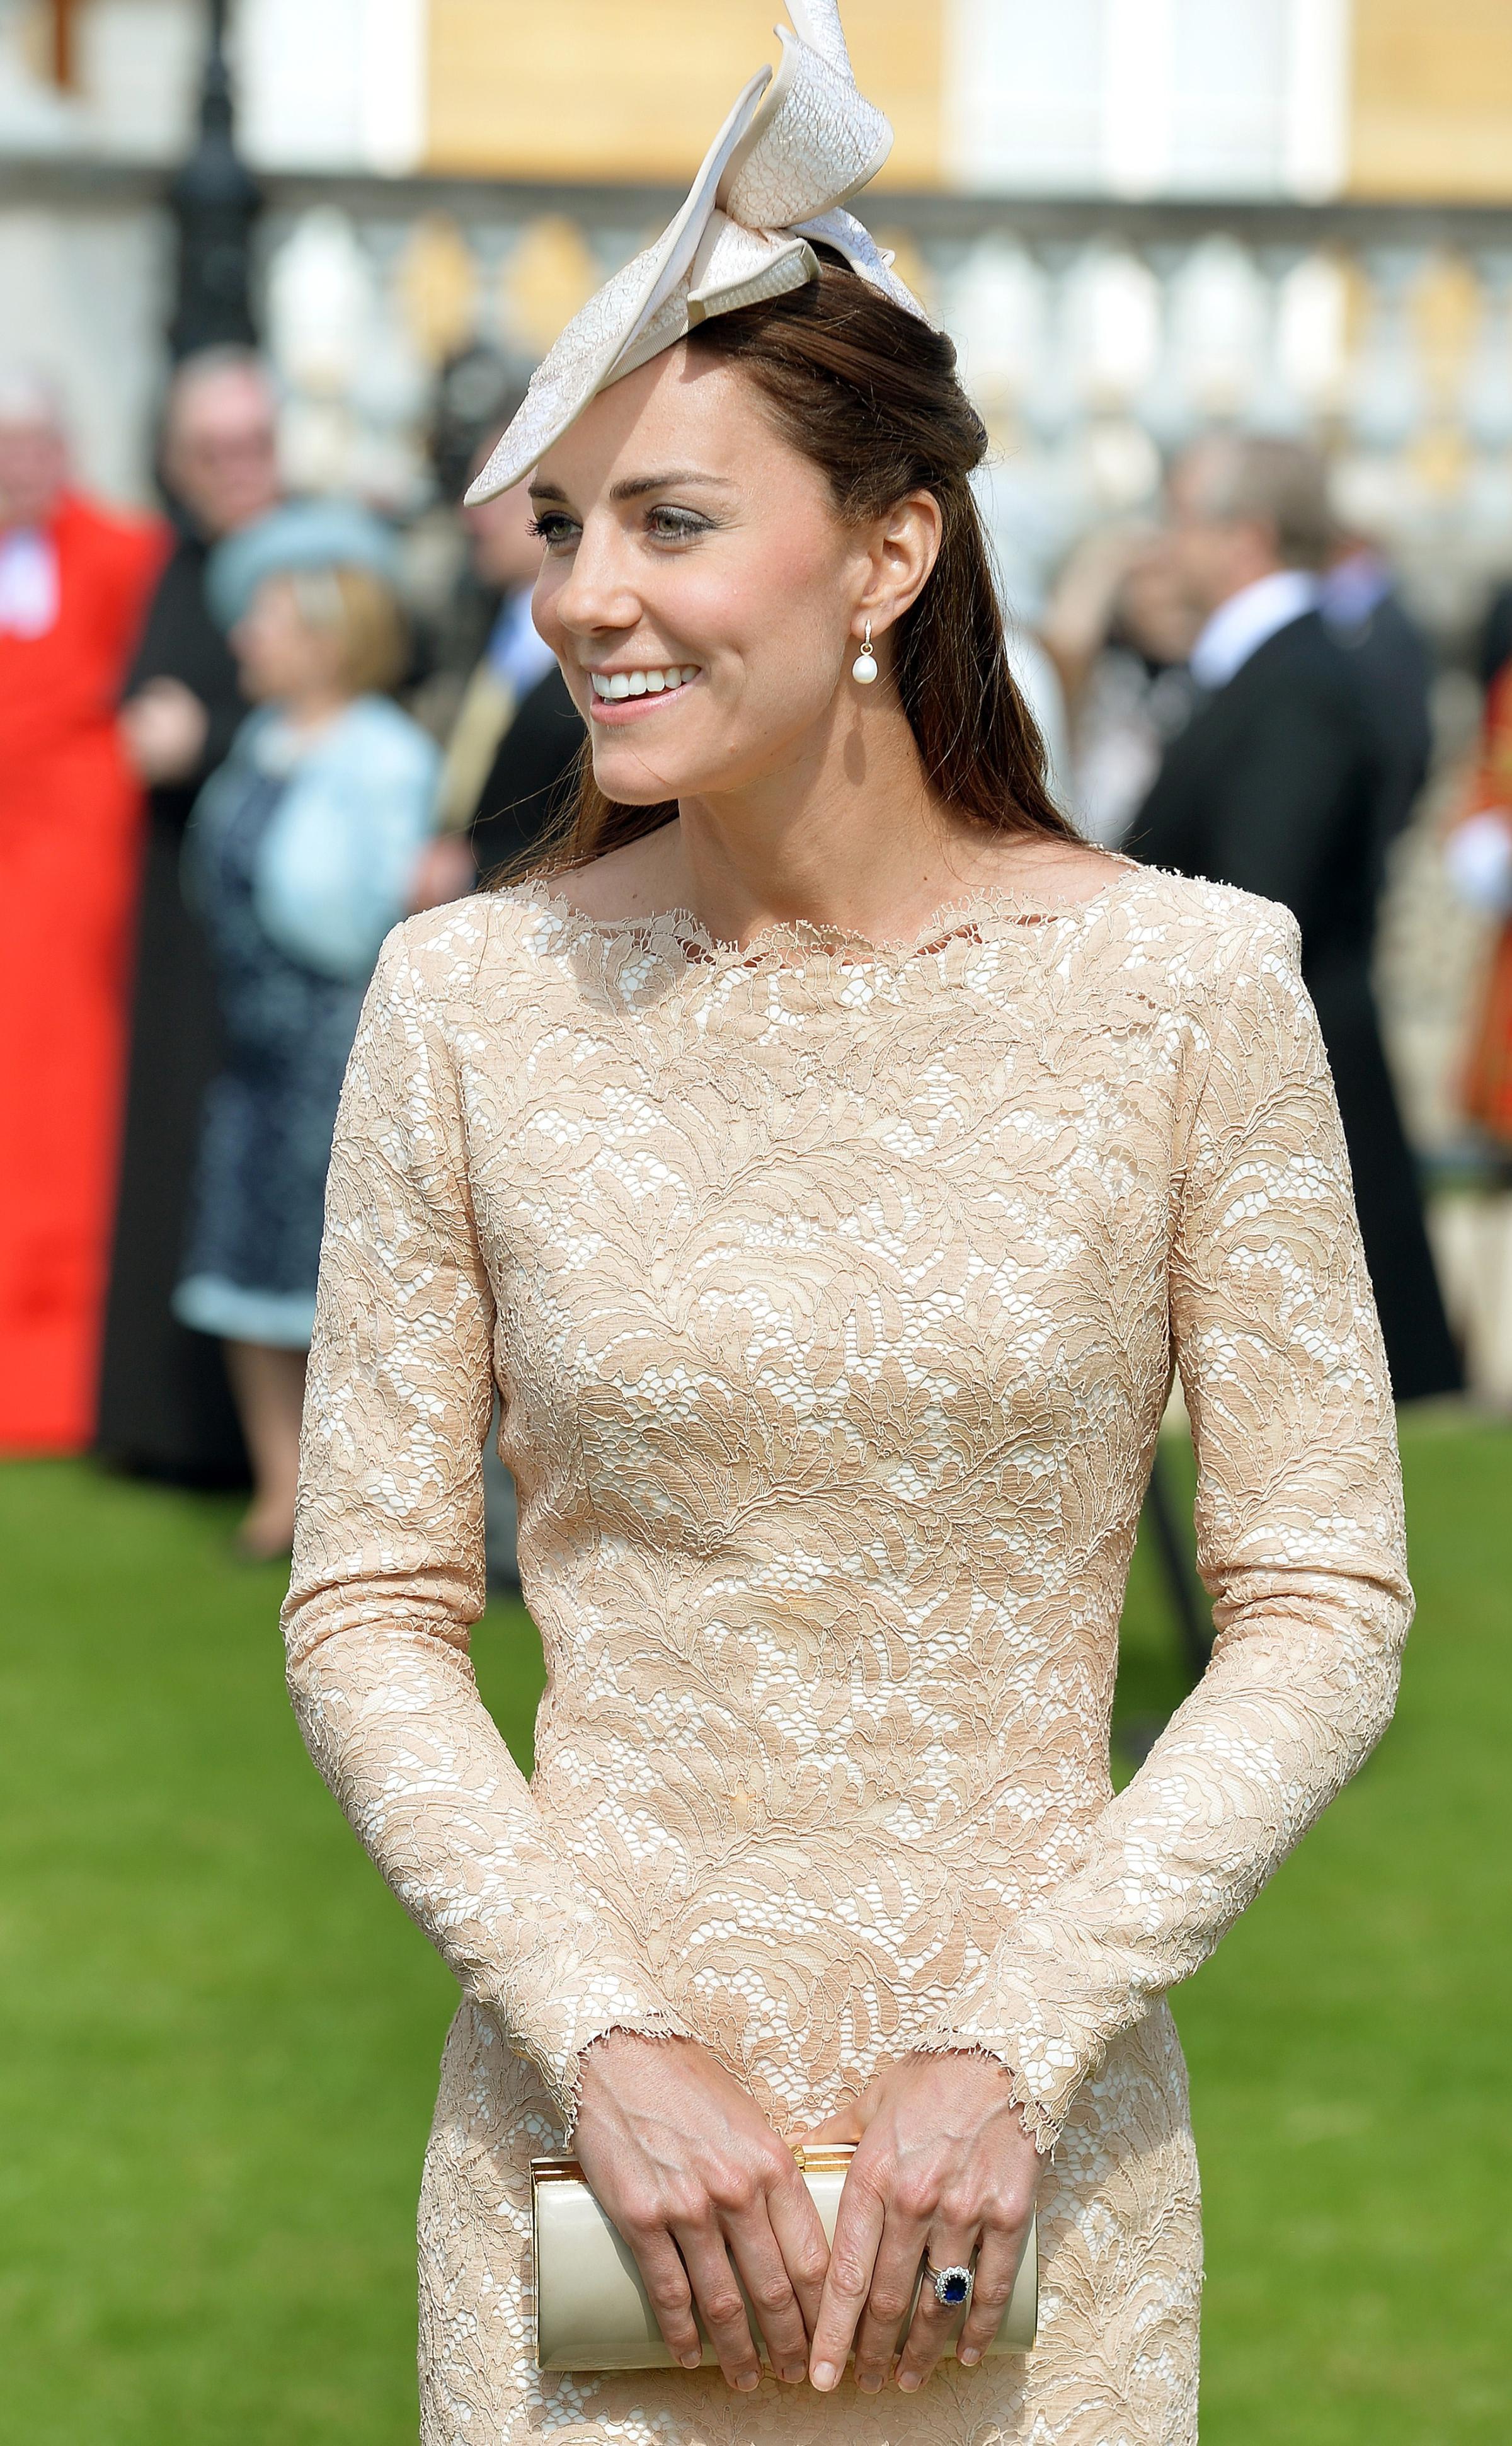 Britain's Catherine, Duchess of Cambridge, attends a garden party at Buckingham Palace in London on June 10, 2014.